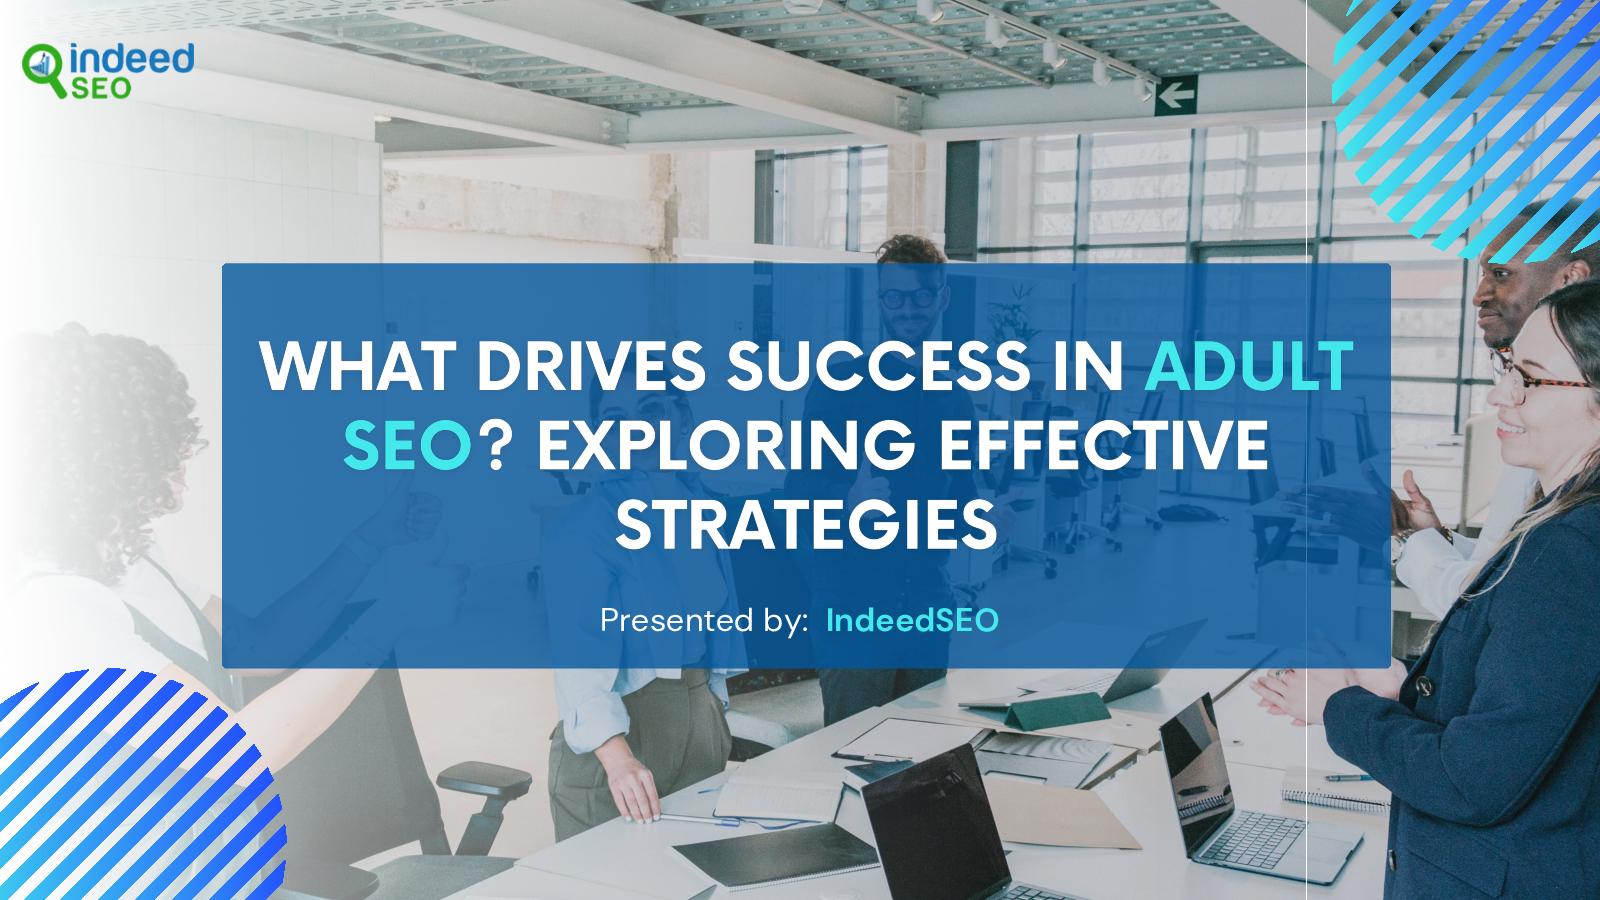 Strategies for Success in Adult SEO